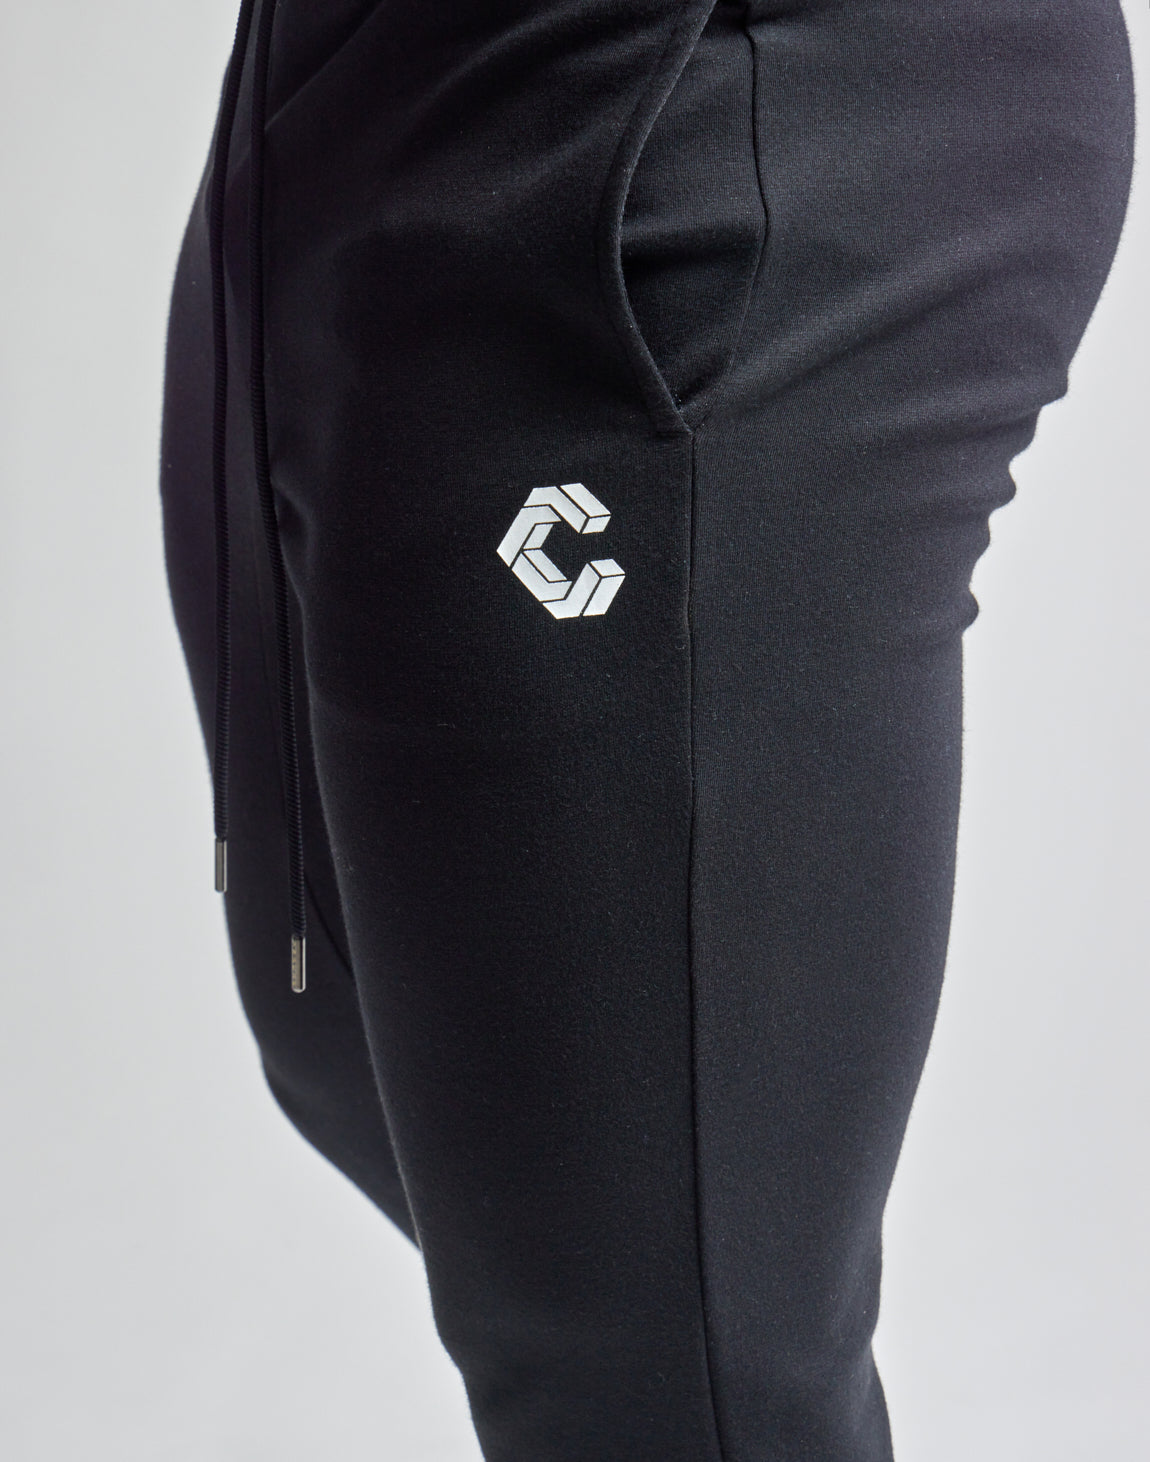 CRONOS MODE STRETCH PANTS – クロノス CRONOS Official Store